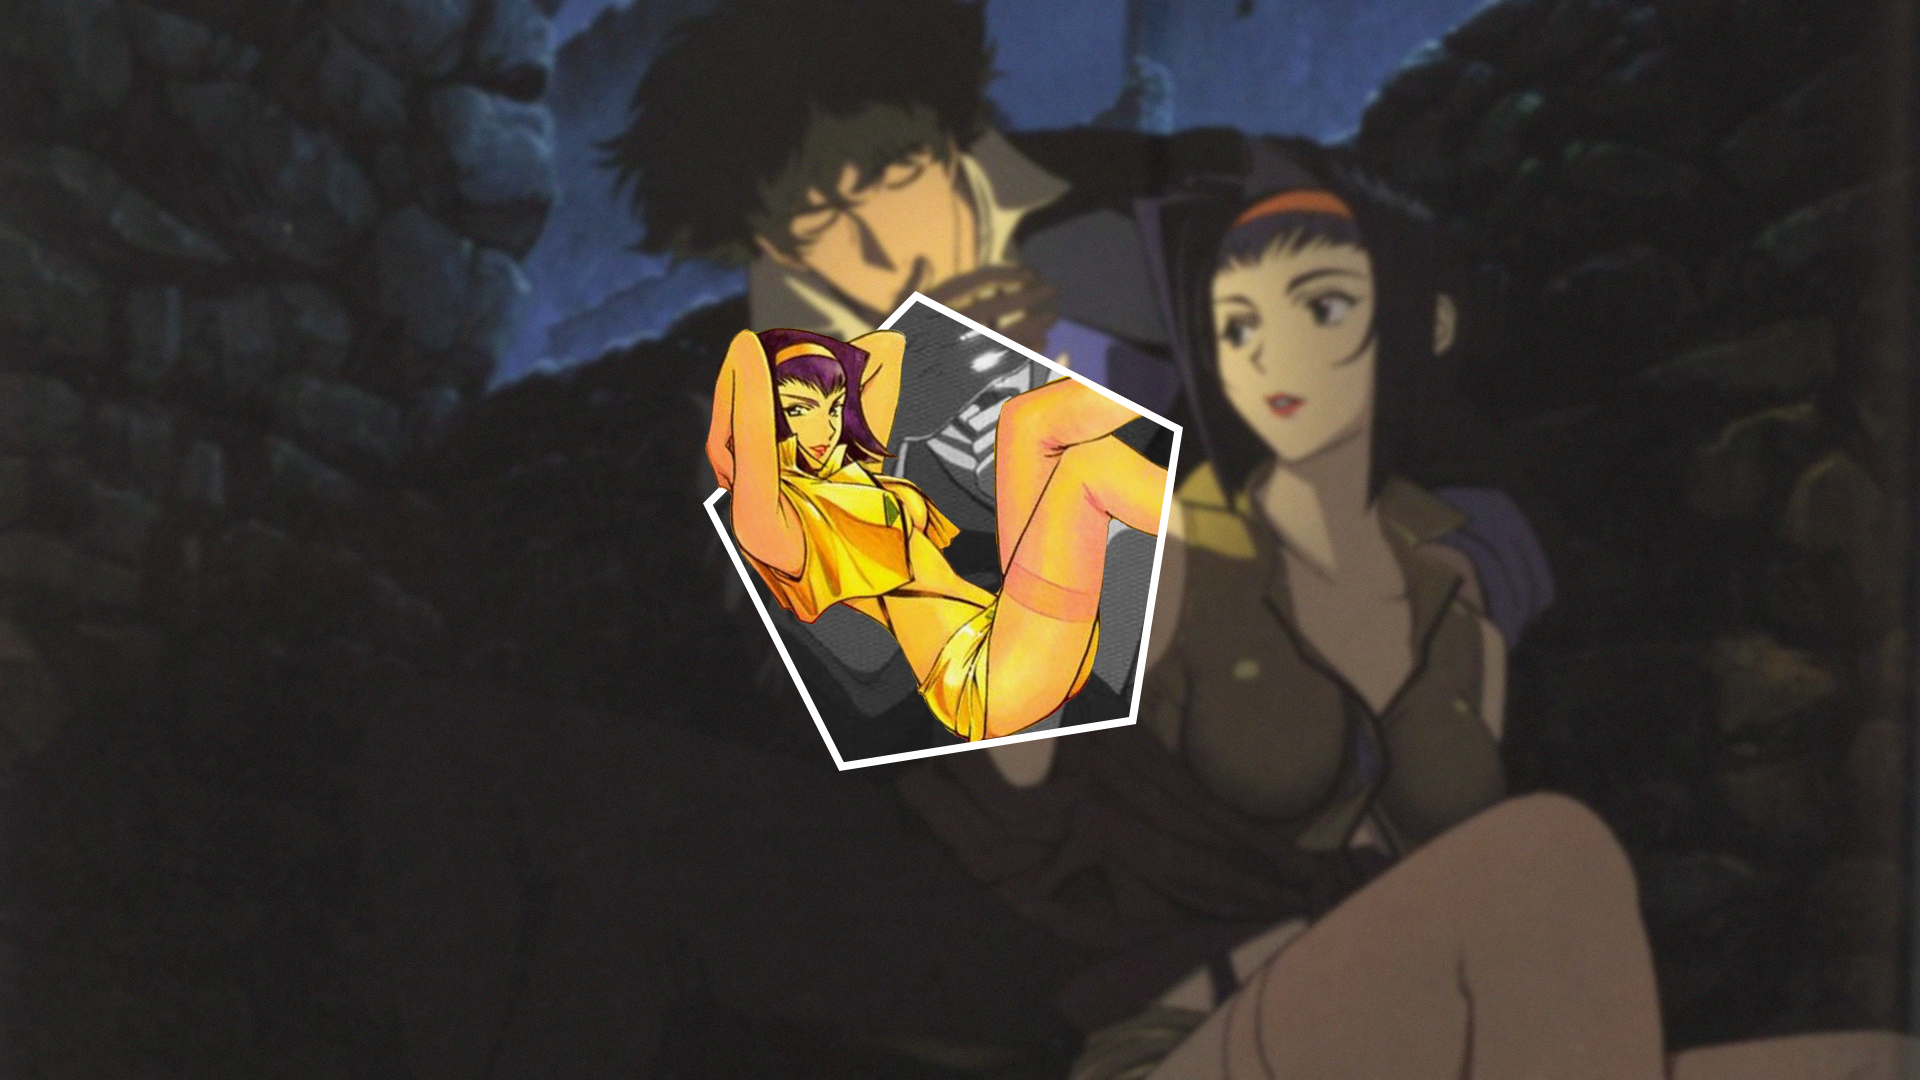 Anime 1920x1080 Cowboy Bebop Spike Spiegel Faye Valentine picture-in-picture anime girls anime purple hair stockings